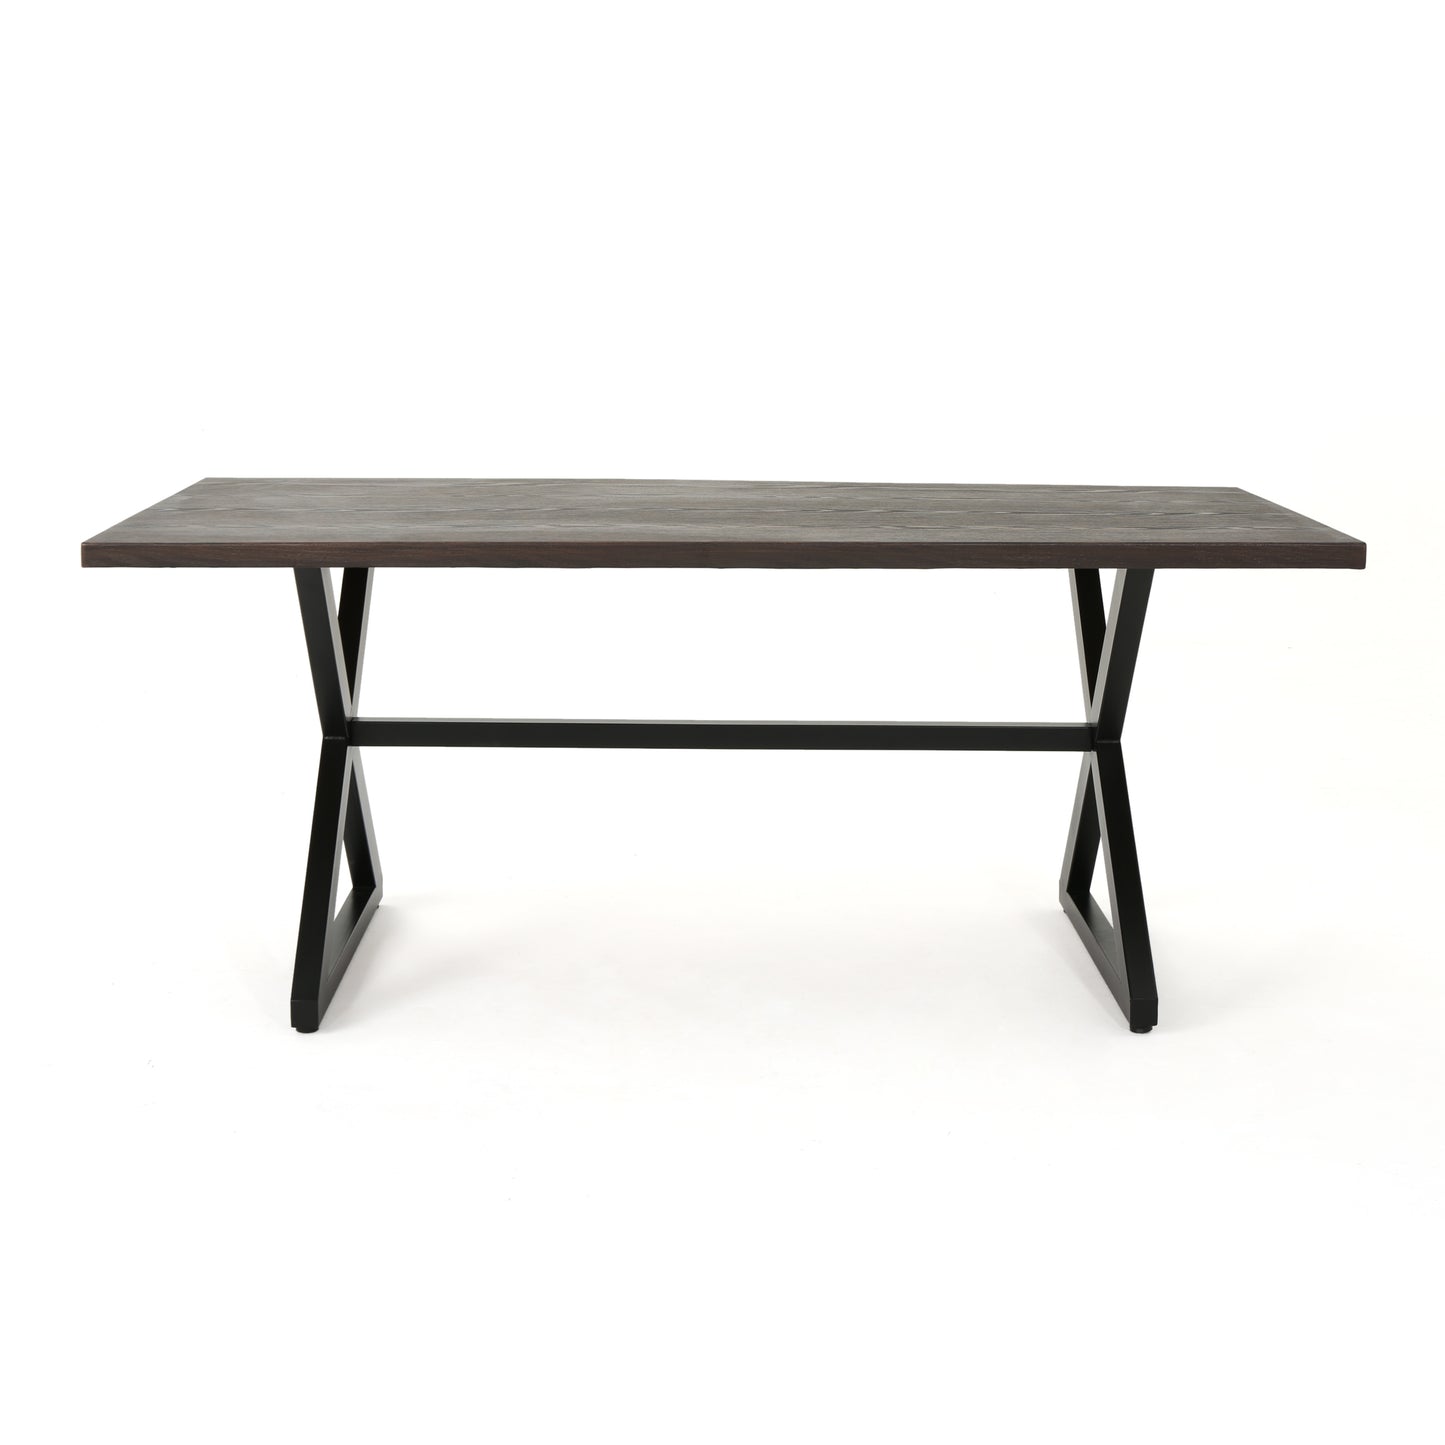 Rosarito Outdoor Aluminum Dining Table with Black Steel Frame